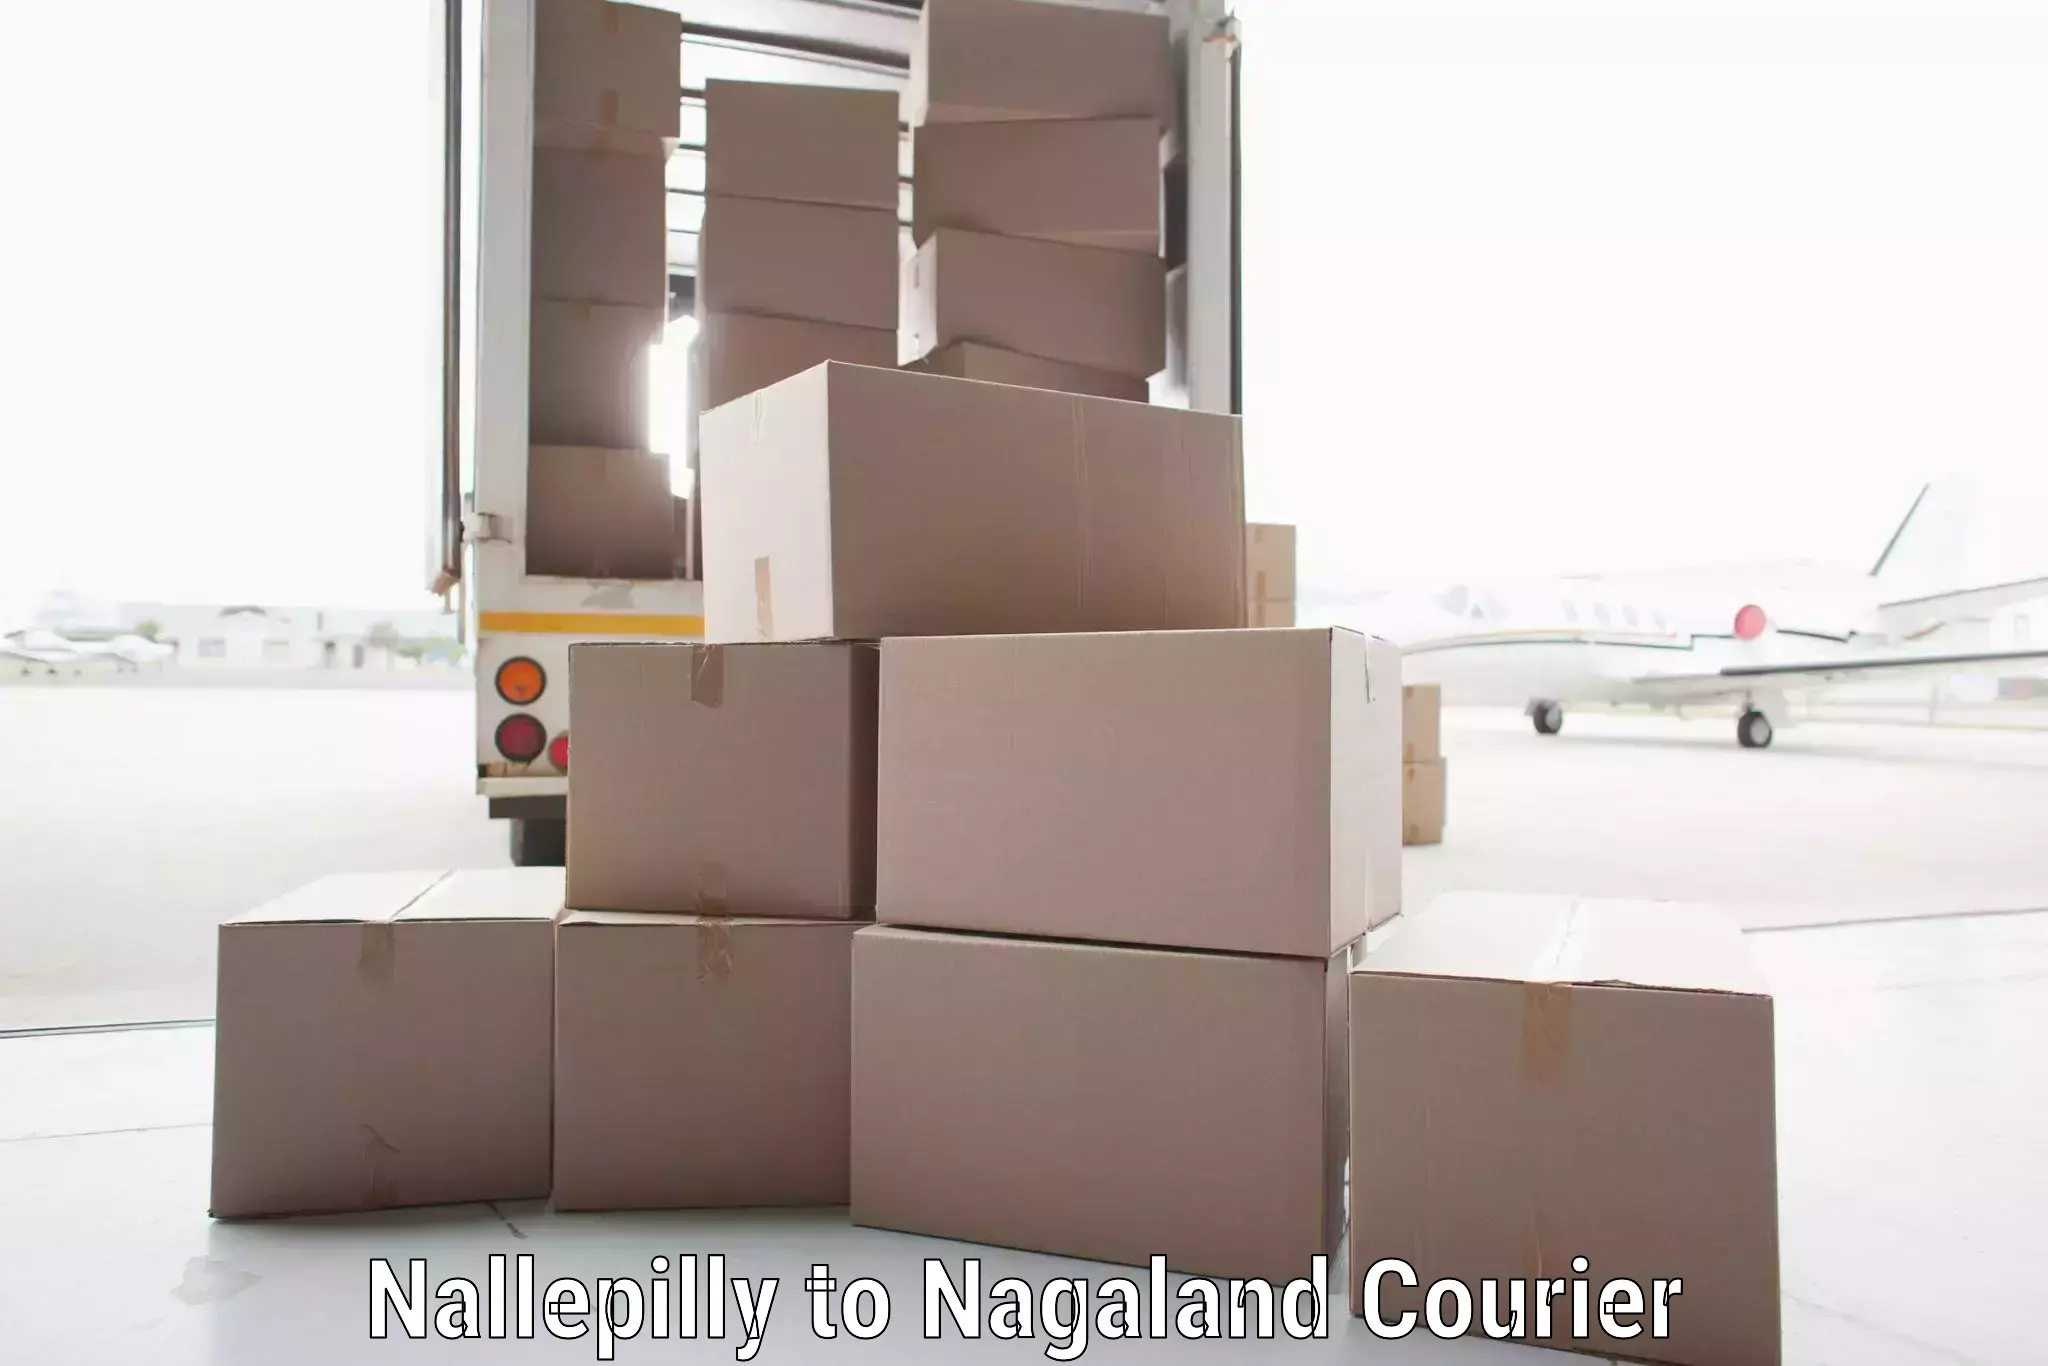 Flexible delivery schedules Nallepilly to Wokha